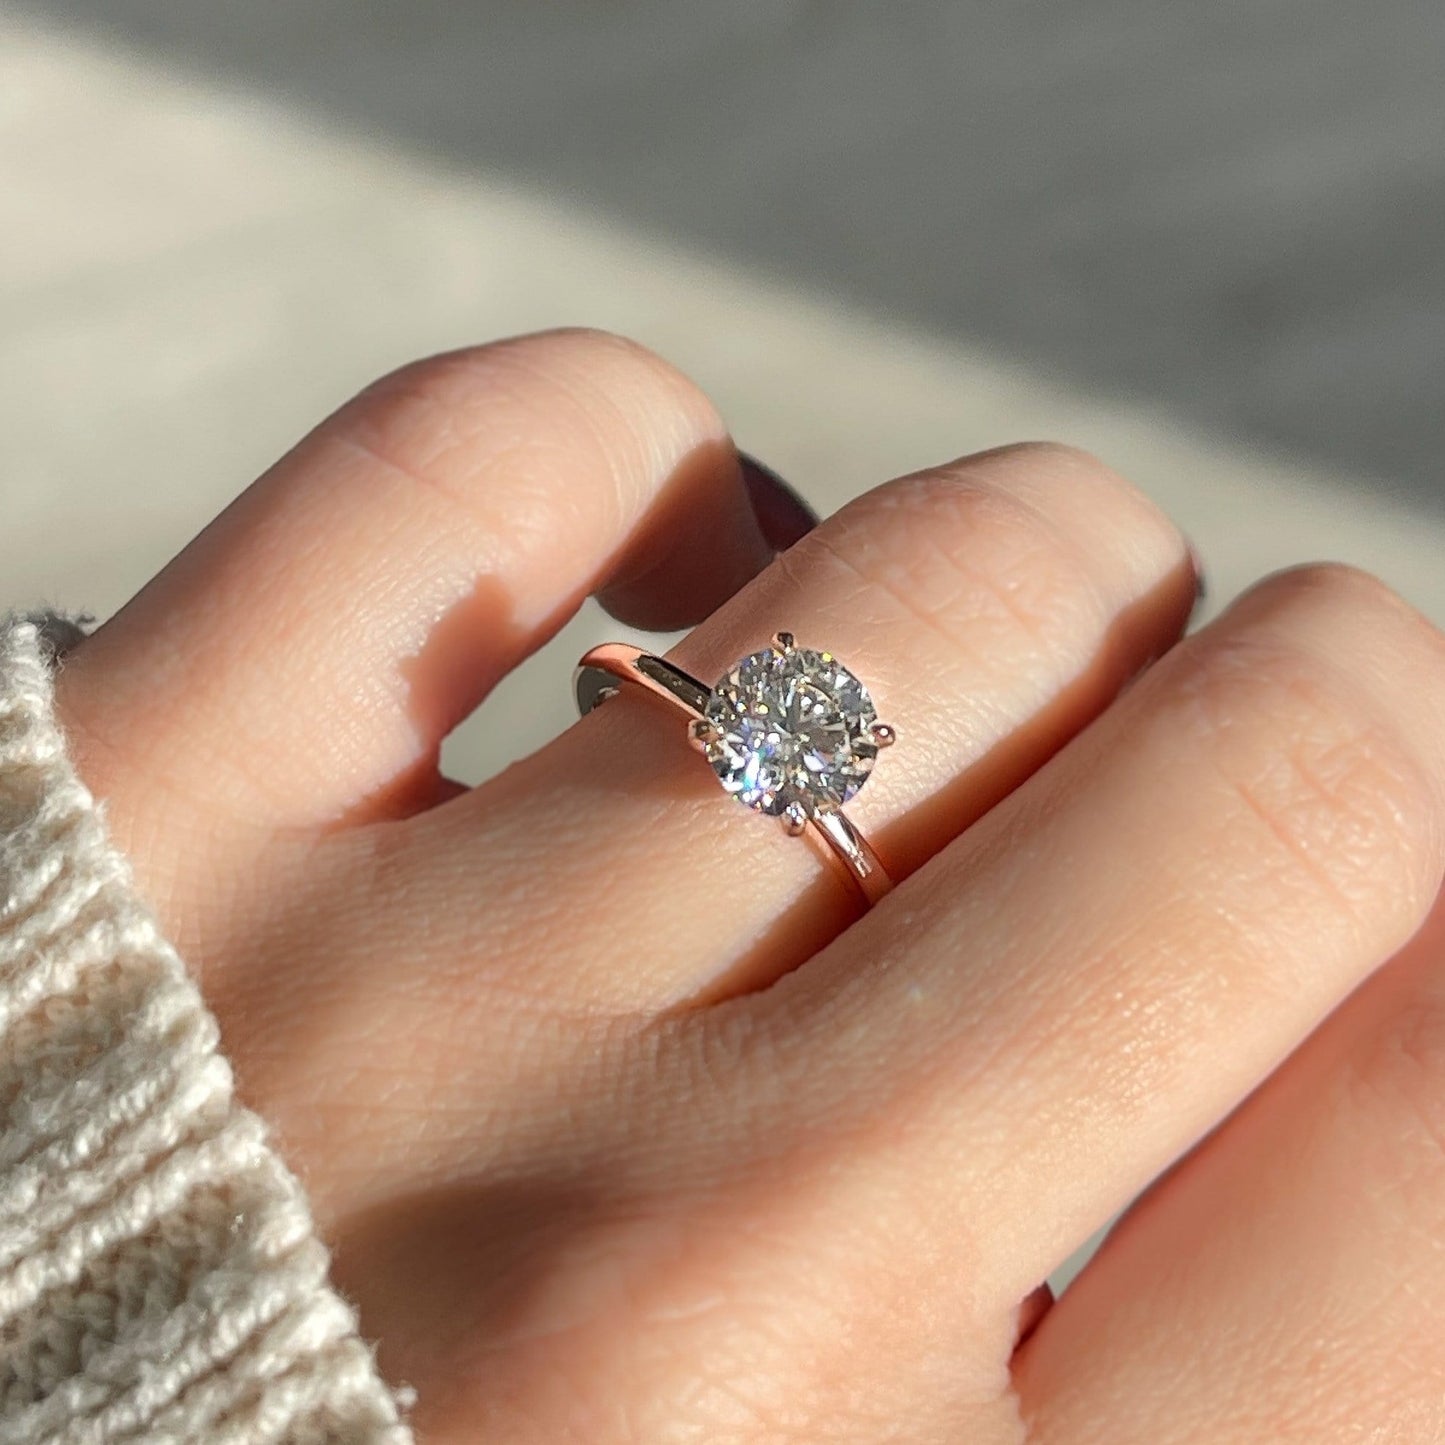 Buy Your Engagement Ring Used: Debunking the bad luck – Oaks Pawn And  Firearms